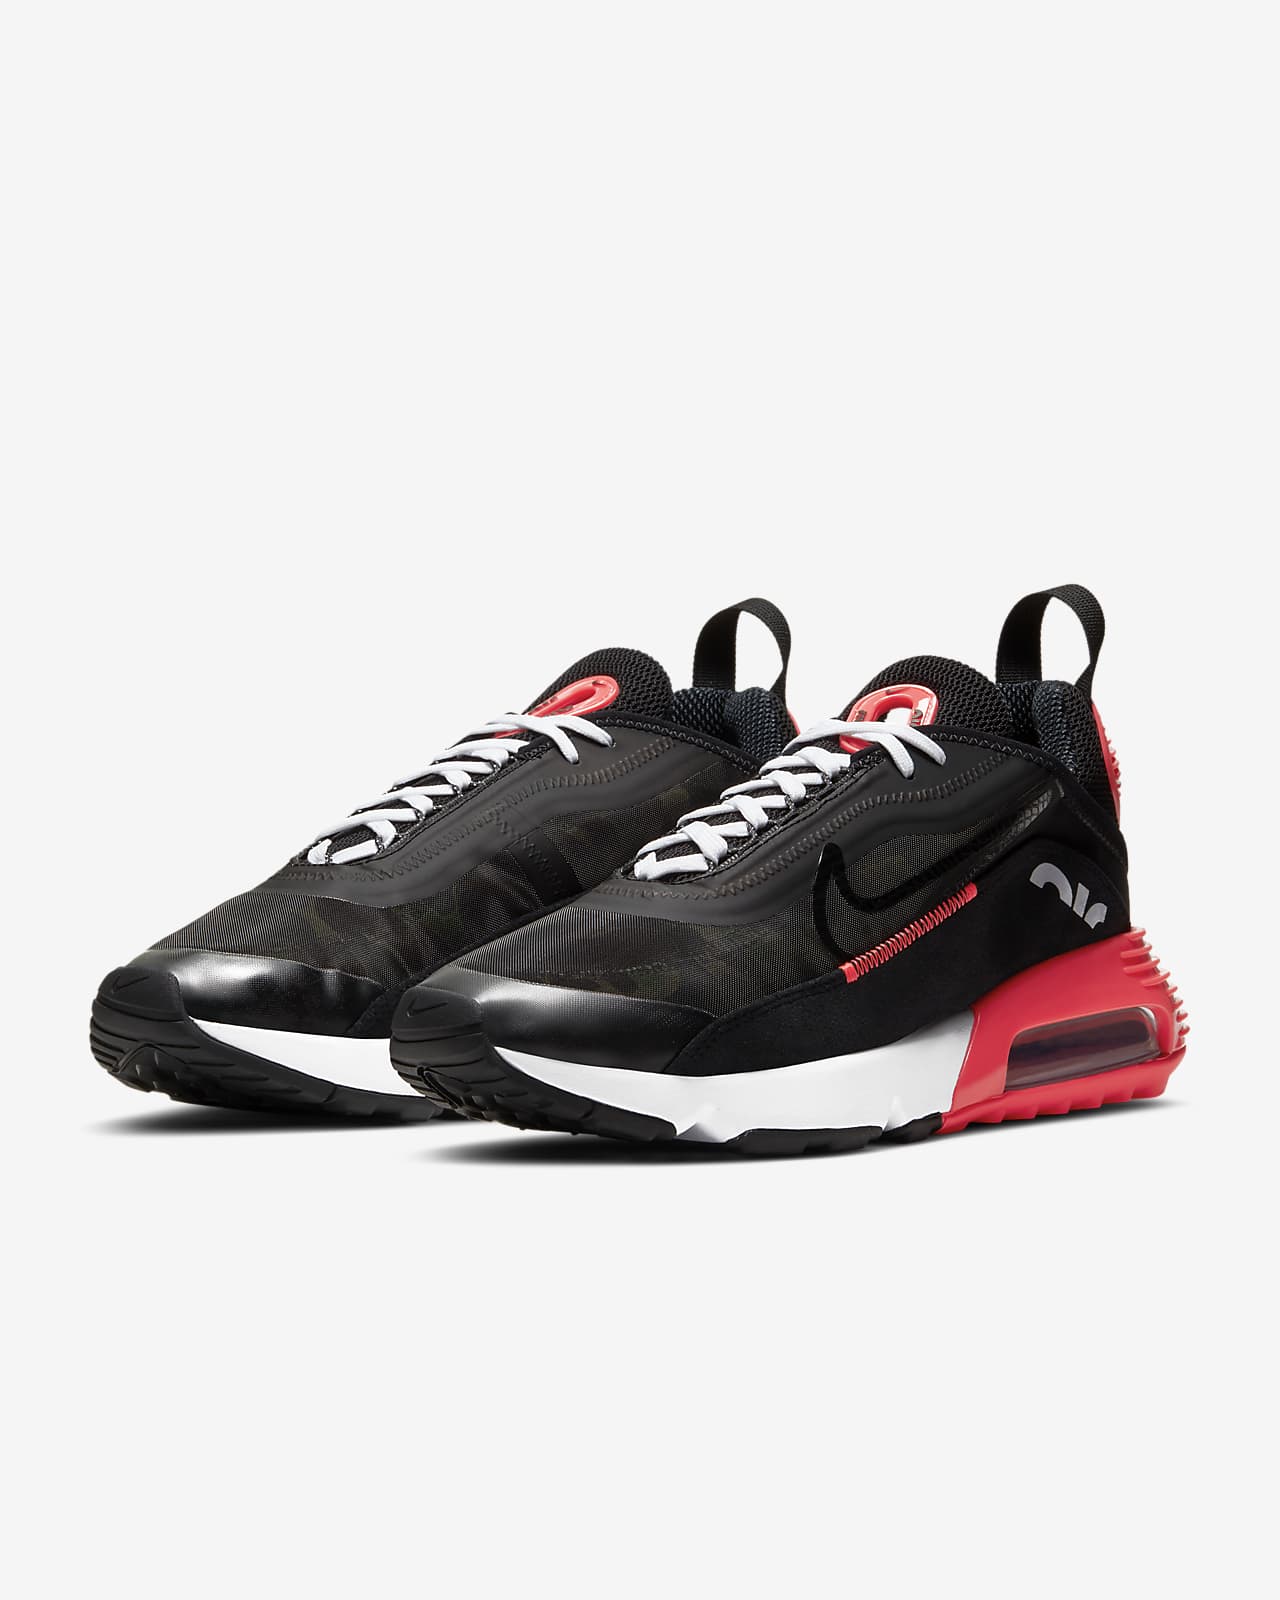 when did nike air max 2090 come out